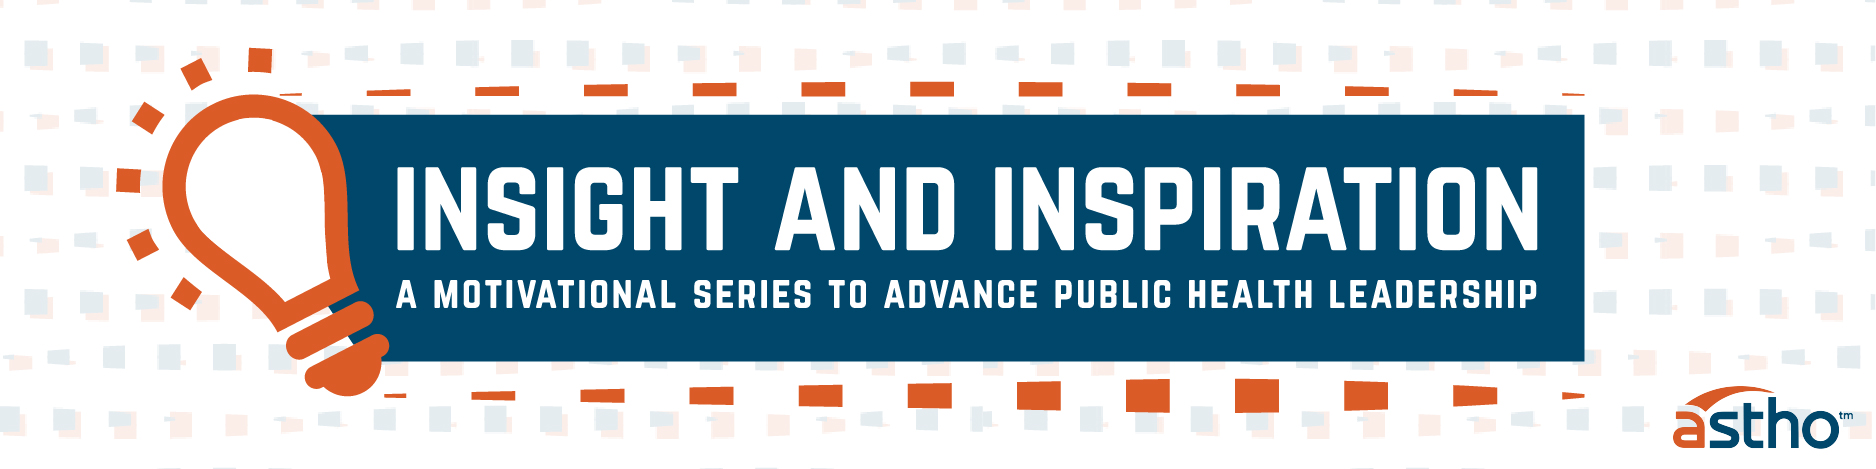 Insight and Inspriation series banner